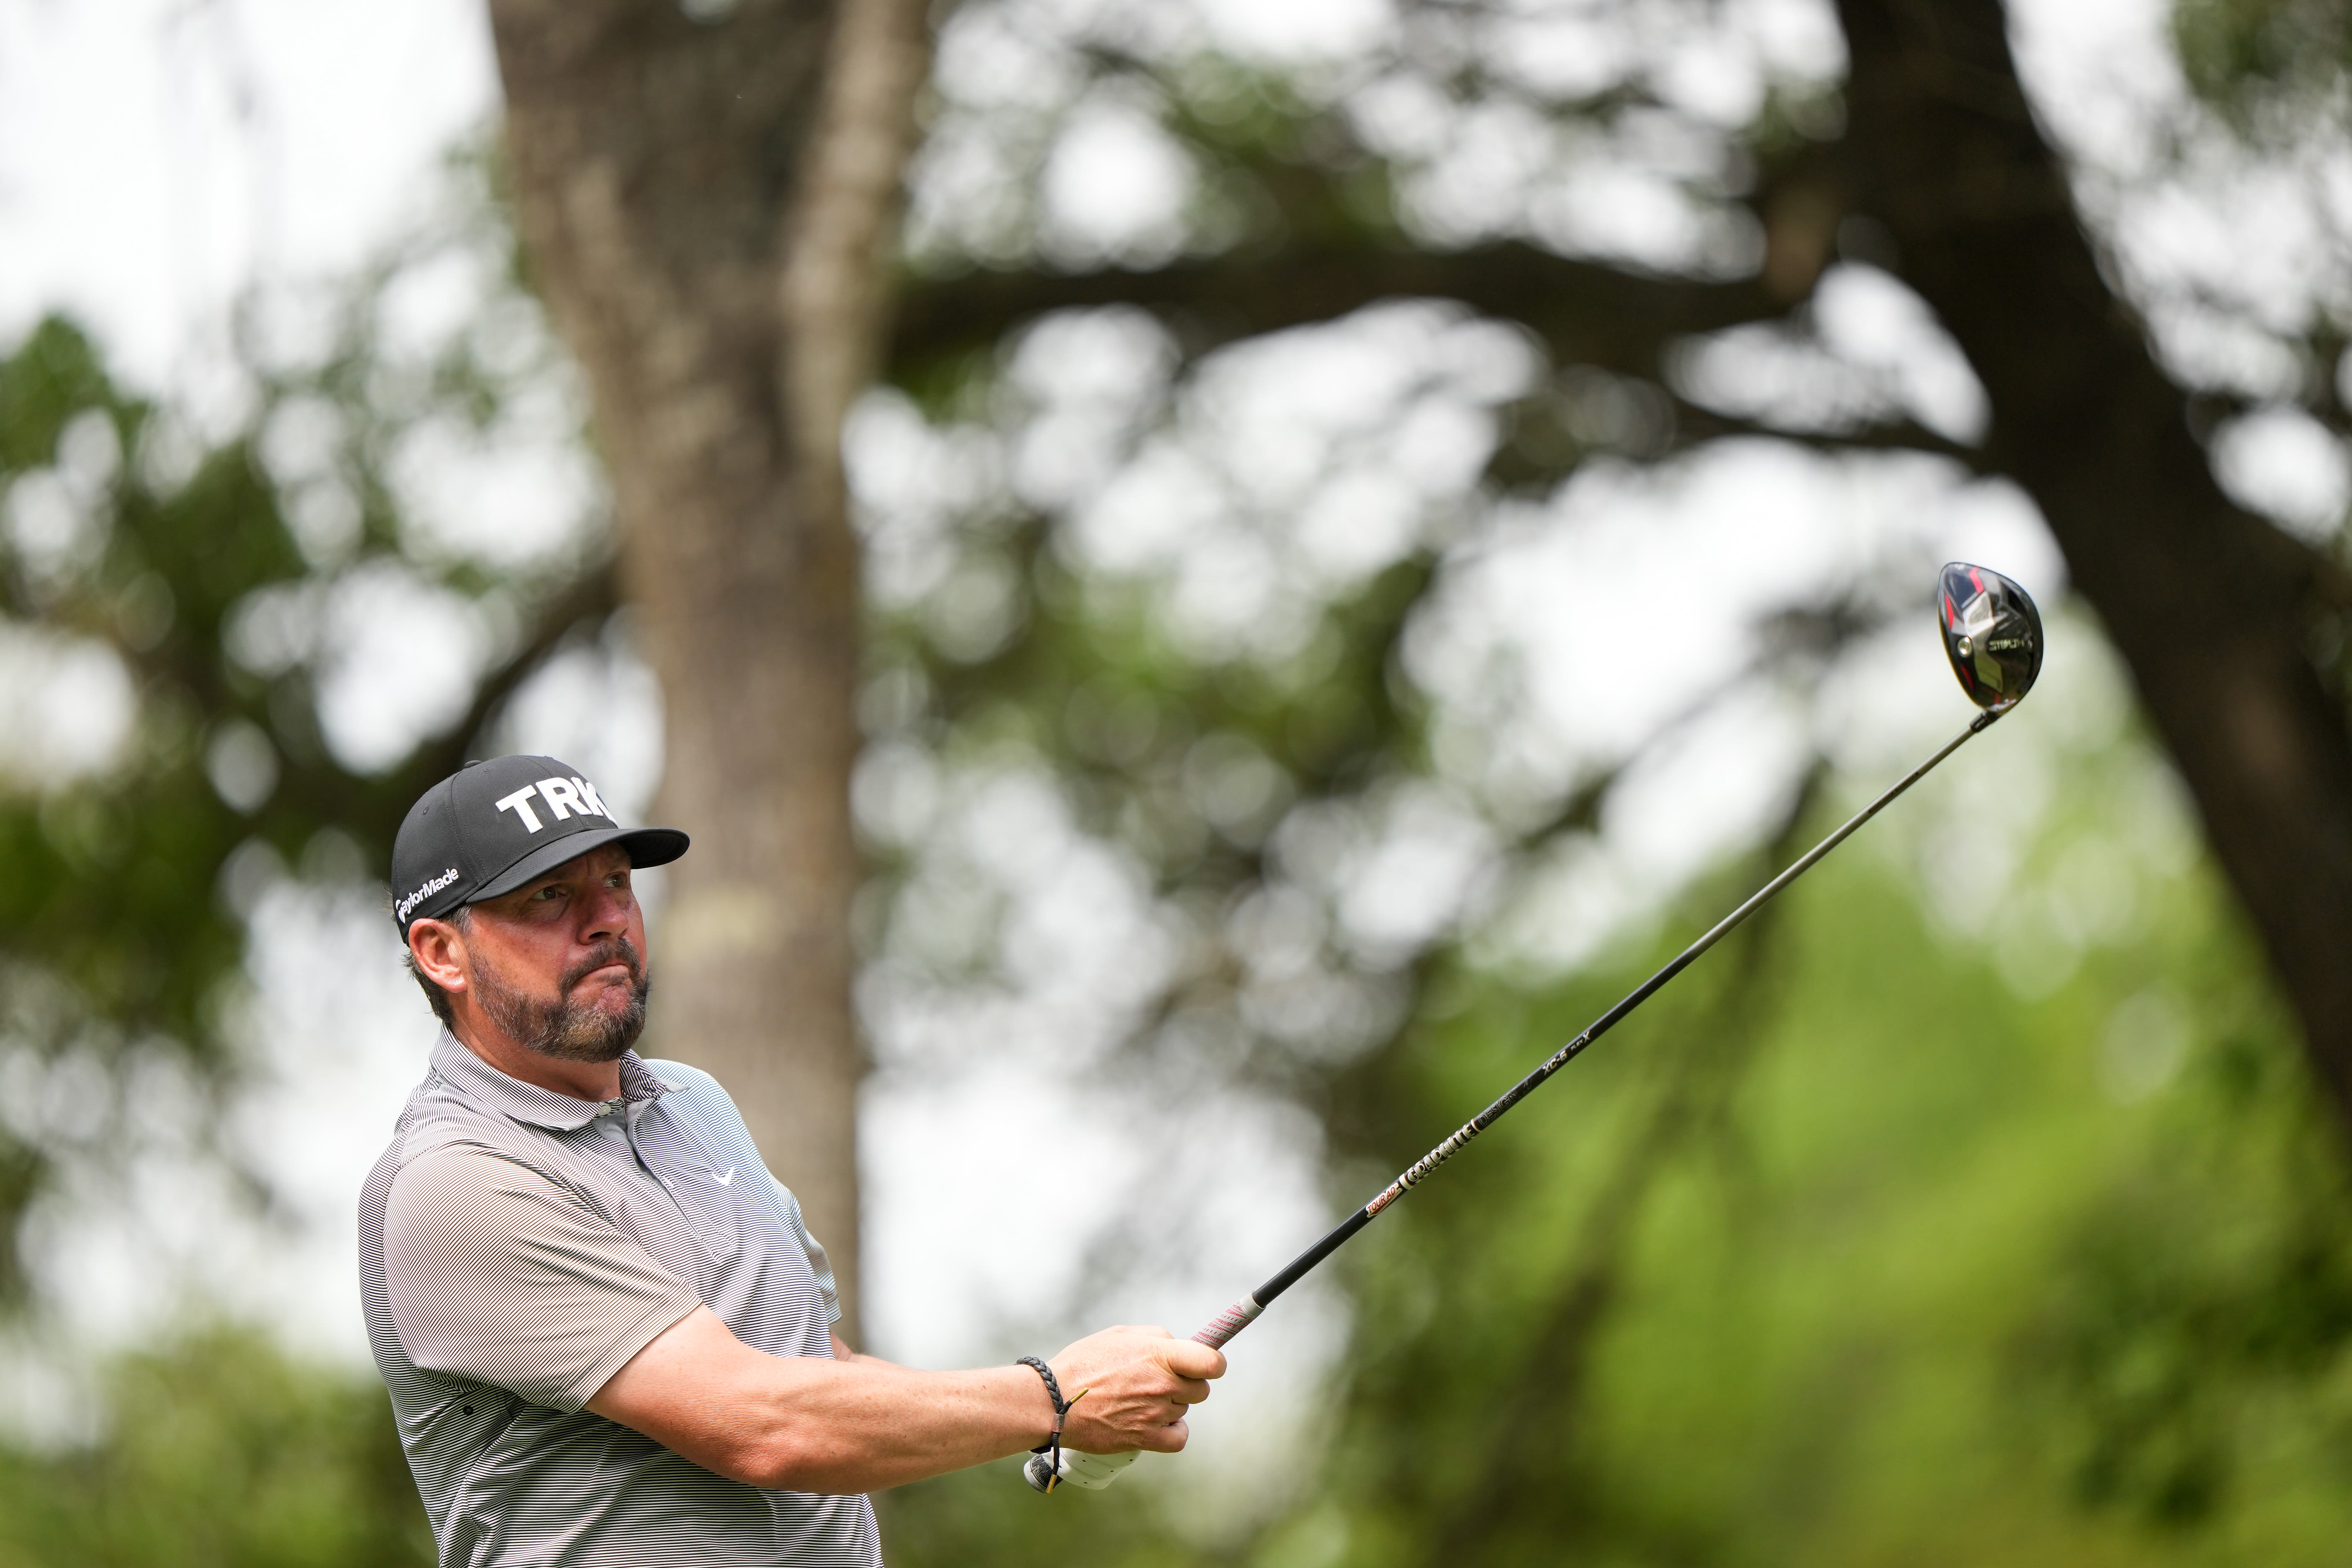 Michael Block hits his shot from the 16th tee during the final round of the 54th PGA Professional Championship at the Omni Barton Creek on April 20, 2022, in Austin, Texas.